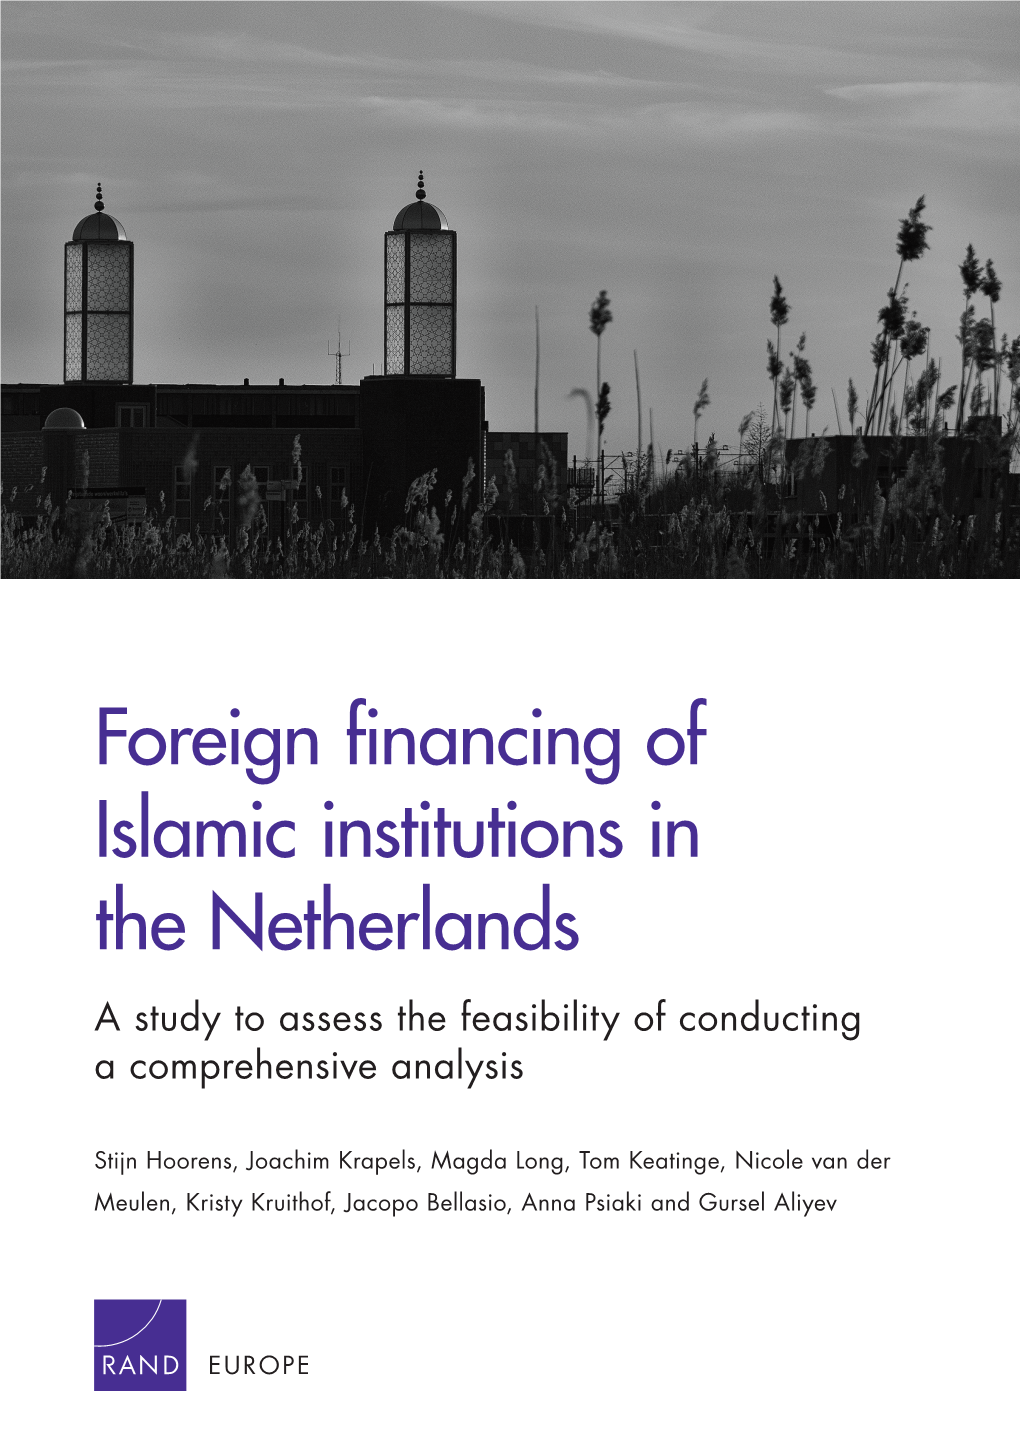 Foreign Financing of Islamic Institutions in the Netherlands a Study to Assess the Feasibility of Conducting a Comprehensive Analysis